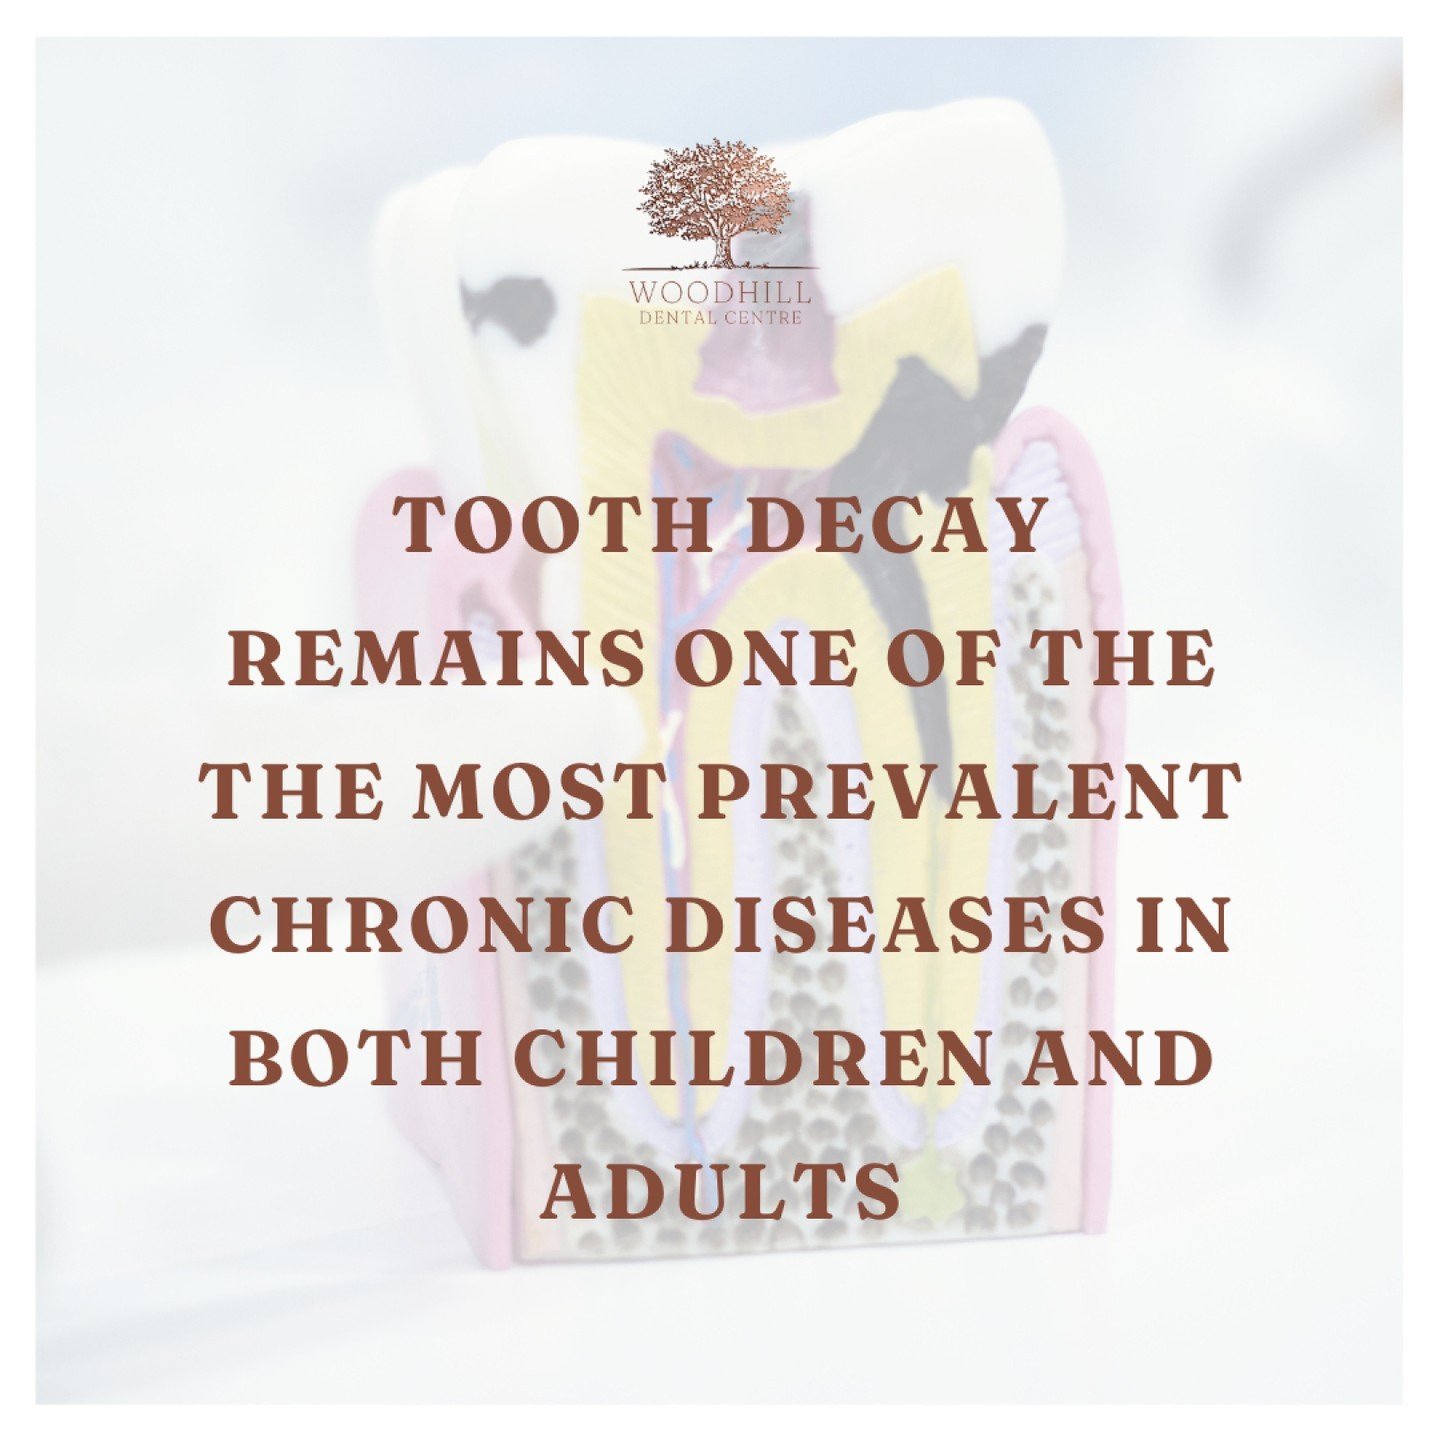 🦷🔍 Don't let tooth decay sneak up on you! Schedule your next check-up today! 📅✨

🌟 Did you know that tooth decay continues to be one of the most common chronic diseases in both children and adults? Let's take control of our oral health and preven